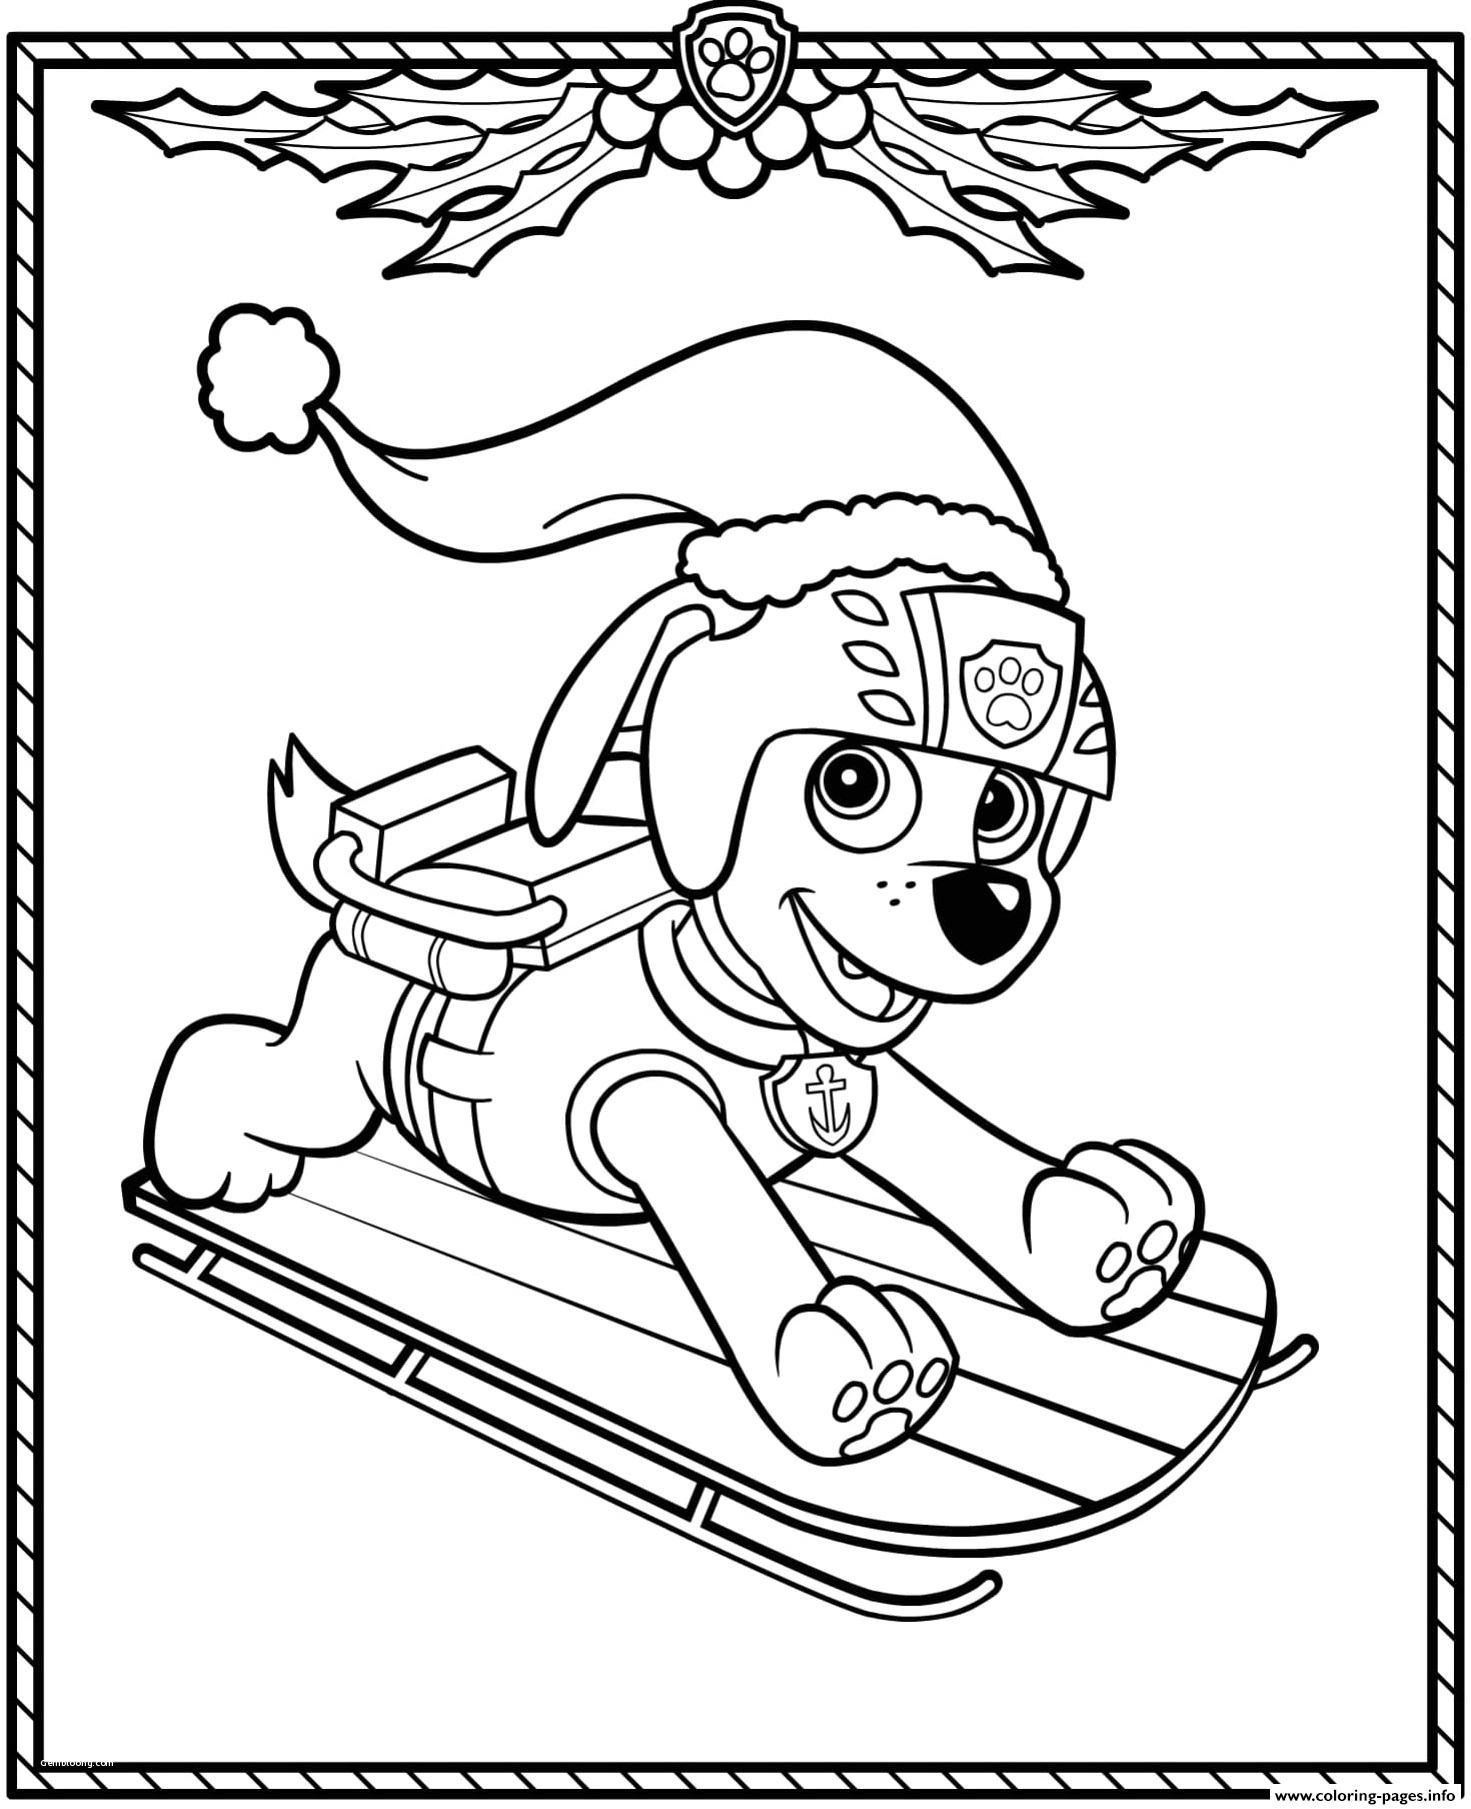 coloring pages : Colouring Images Of Christmas Elegant Print Paw Patrol  Holiday Christmas Zuma Coloring Pages Colouring Images Of Christmas ~  affiliateprogrambook.com